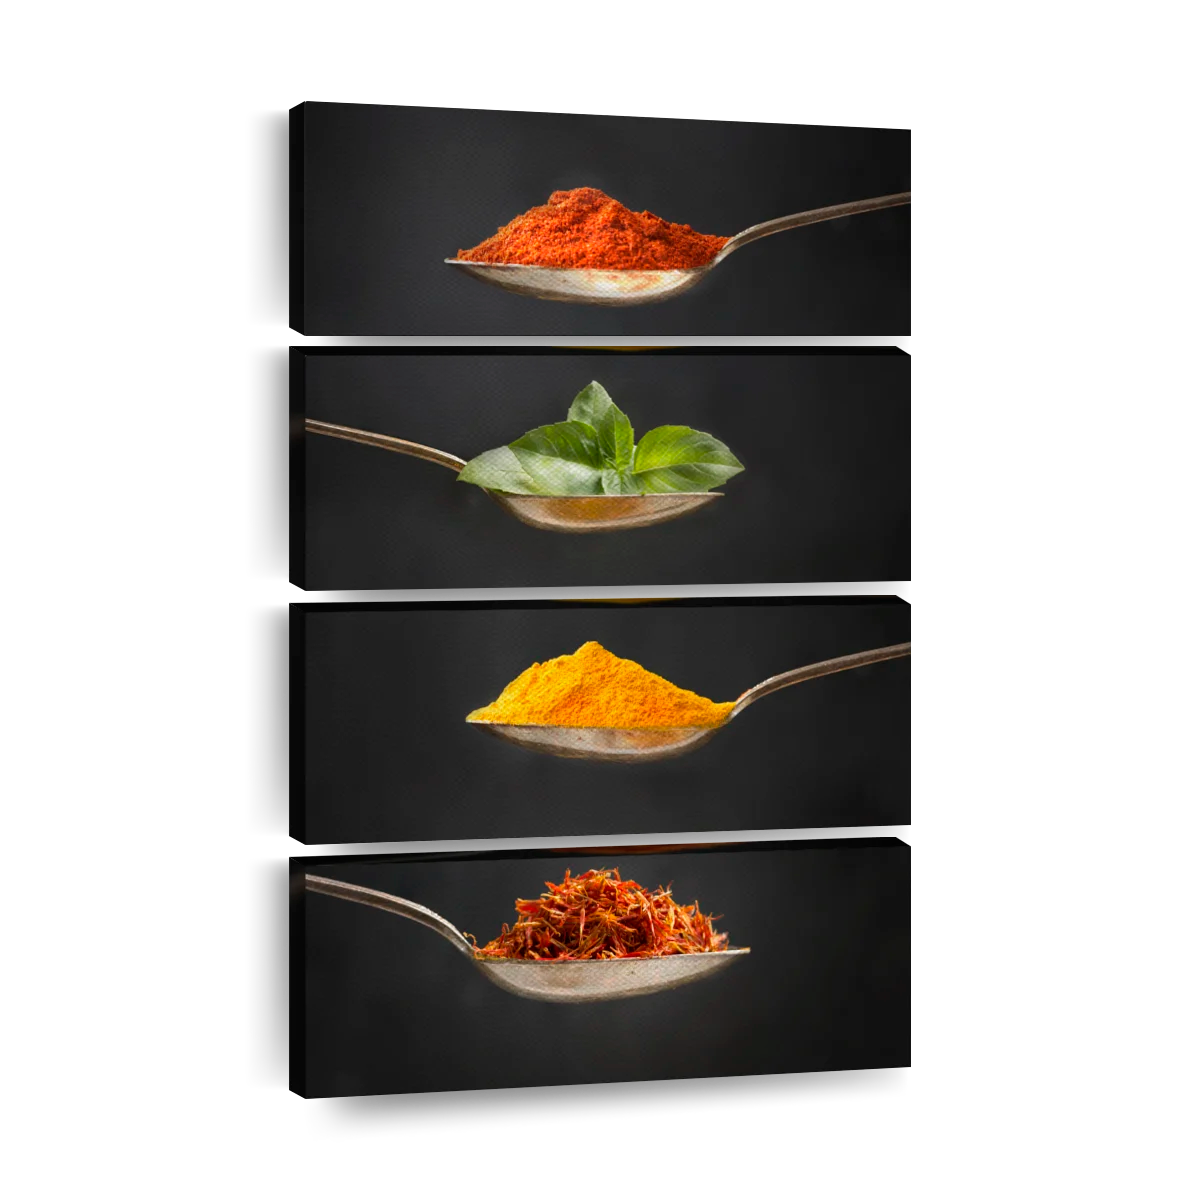 Spices in spoons on black background.